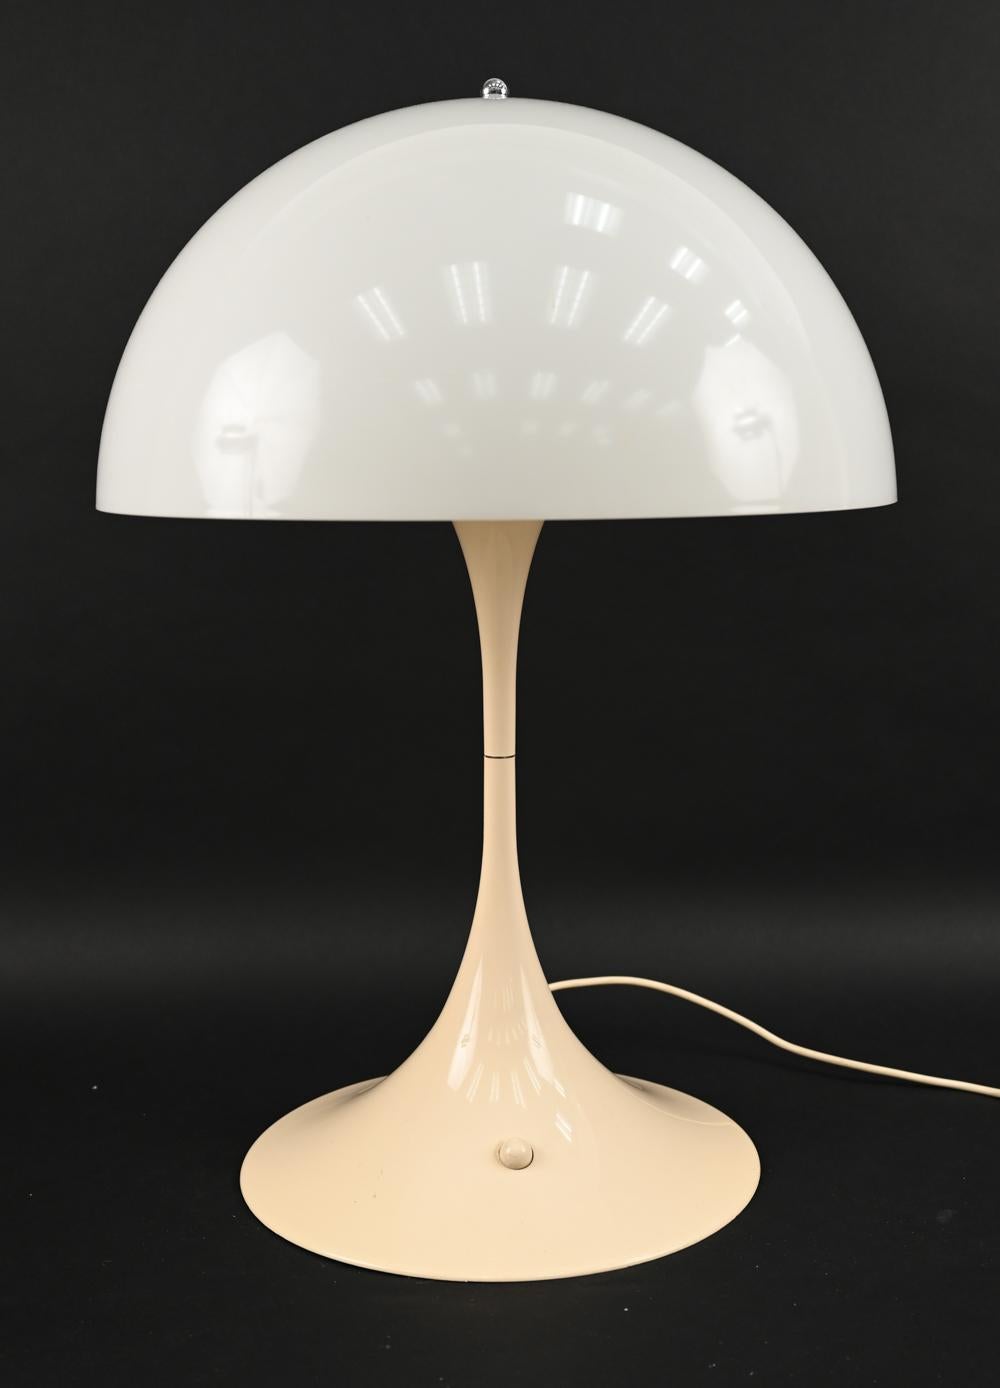 A genuine Danish mid-century Space Age-style table lamp designed by Verner Panton for Louis Poulsen, c. 1970's. This iconic model 